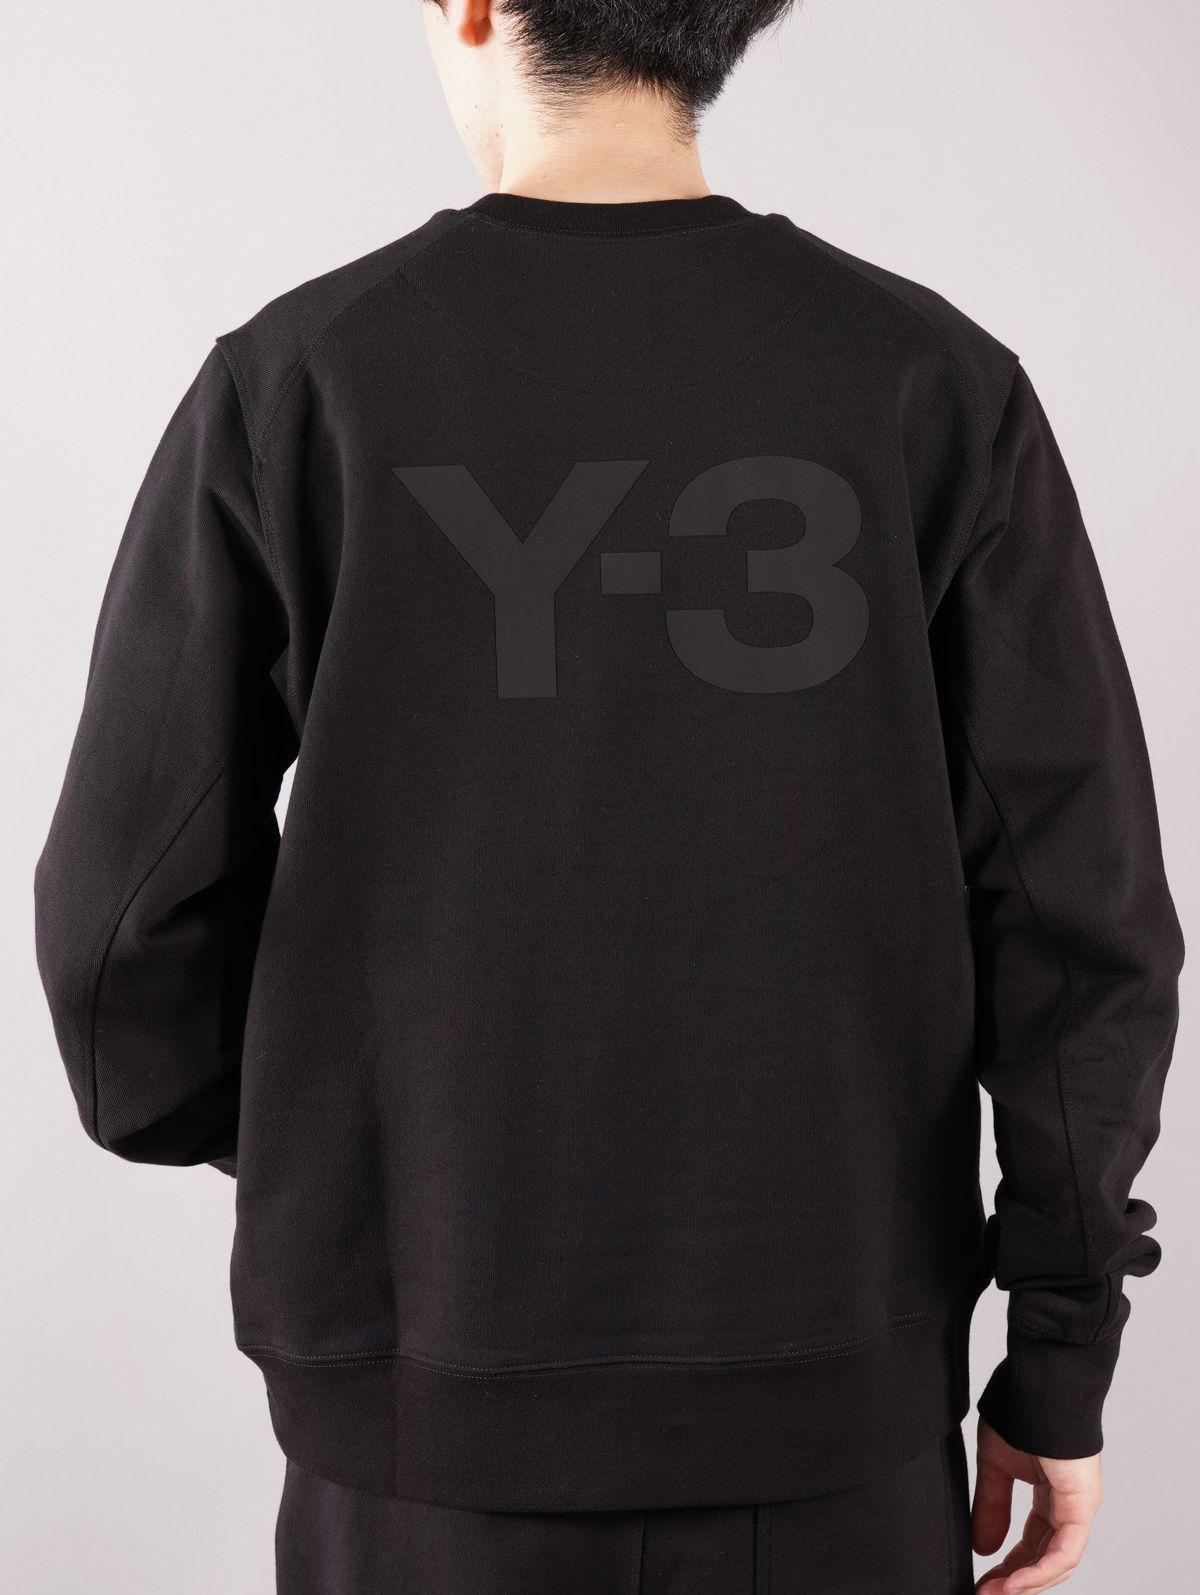 Y-3 - ワイスリー / 21aw / Chapter 1 | Confidence